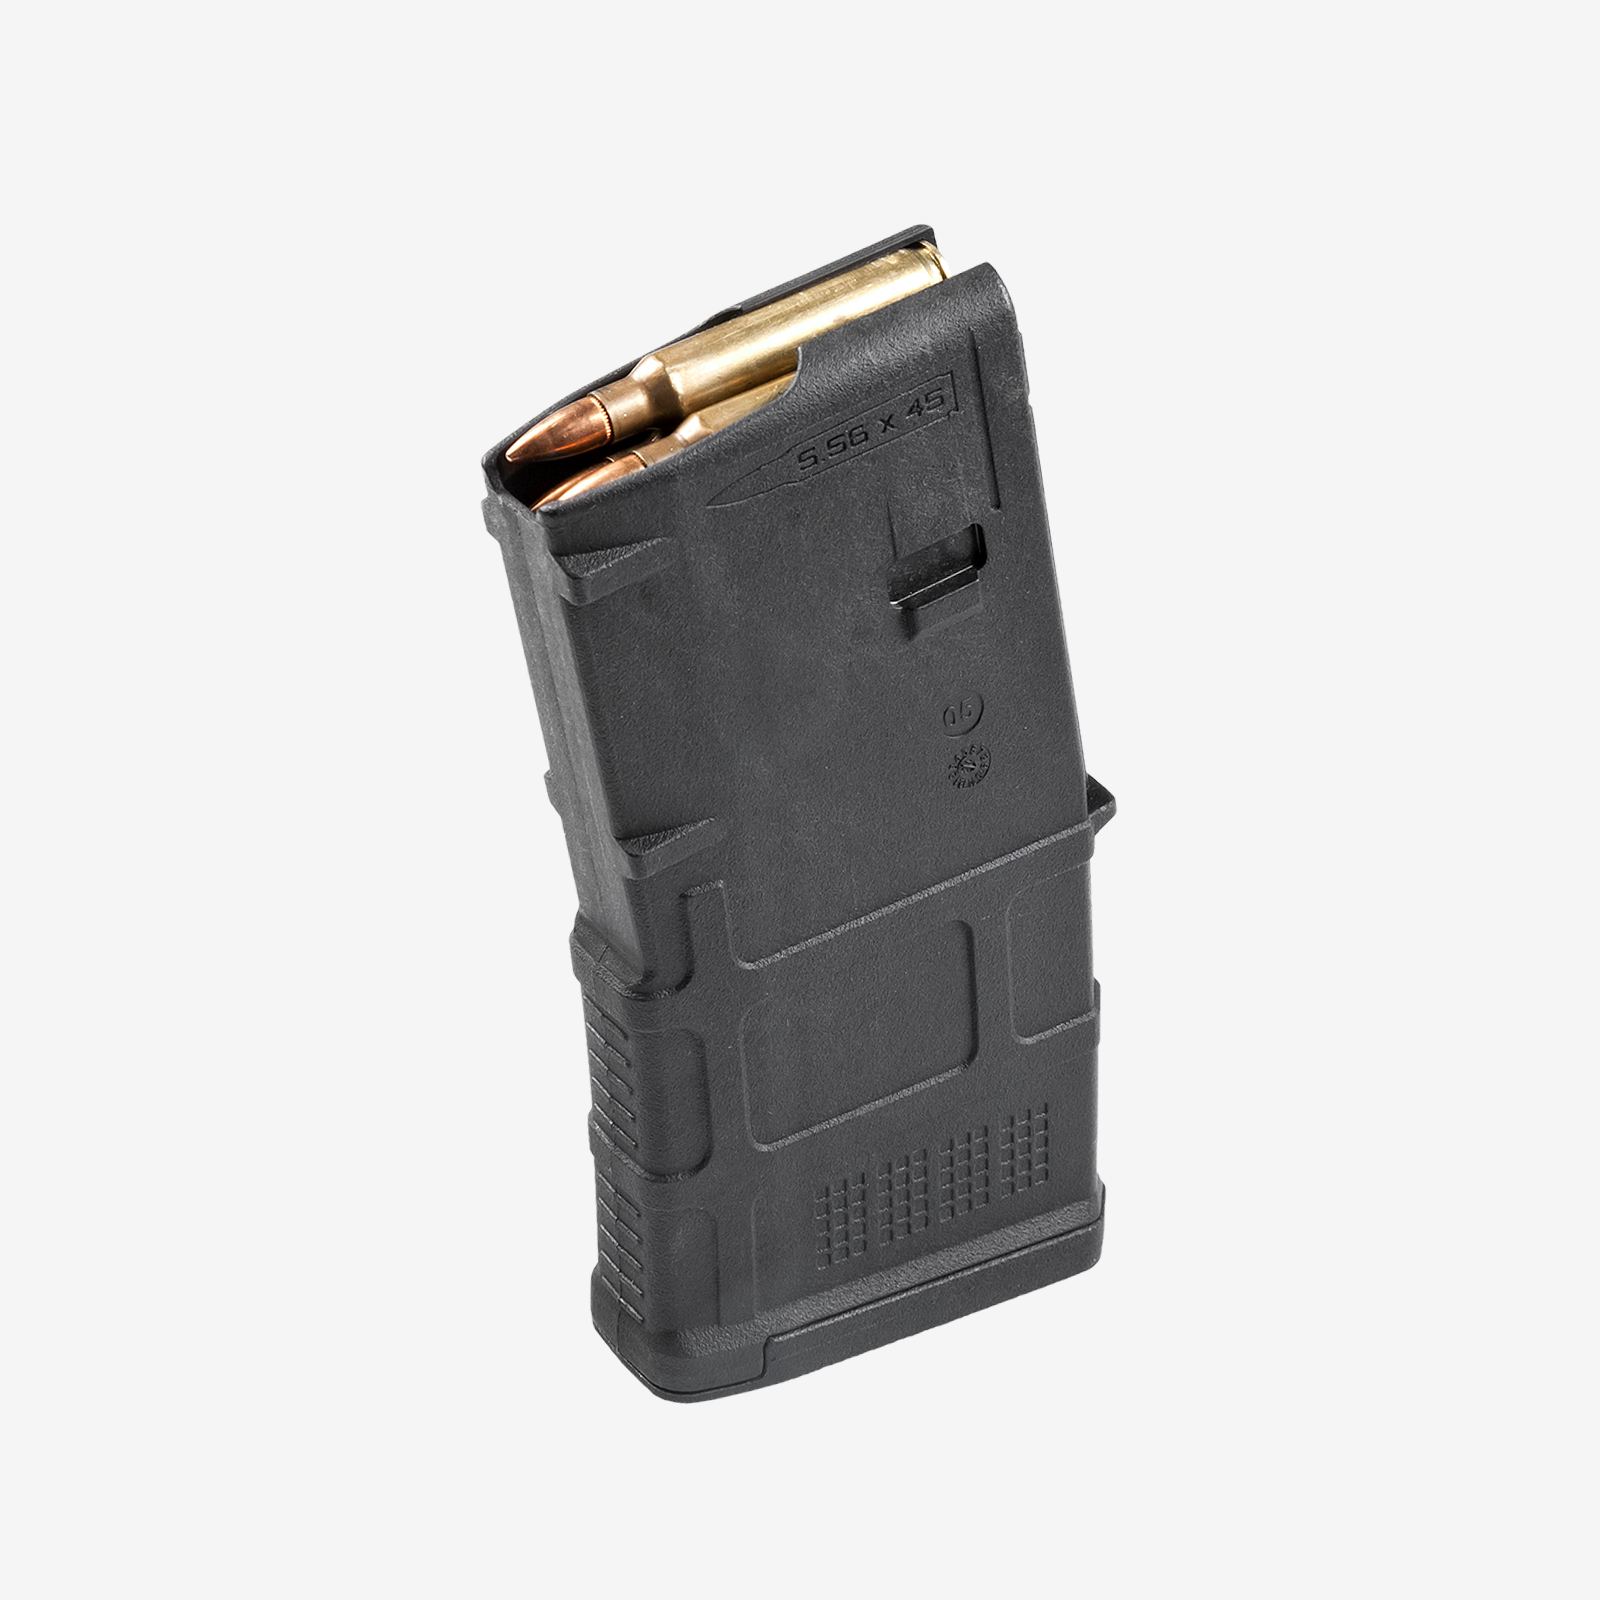 The Magpul 20RD AR15 Black GEN3 PMAG rifle magazine holds 20 5.56x45mm NATO or .223 Remington cartridges for use with AR-15 and M4 rifles.